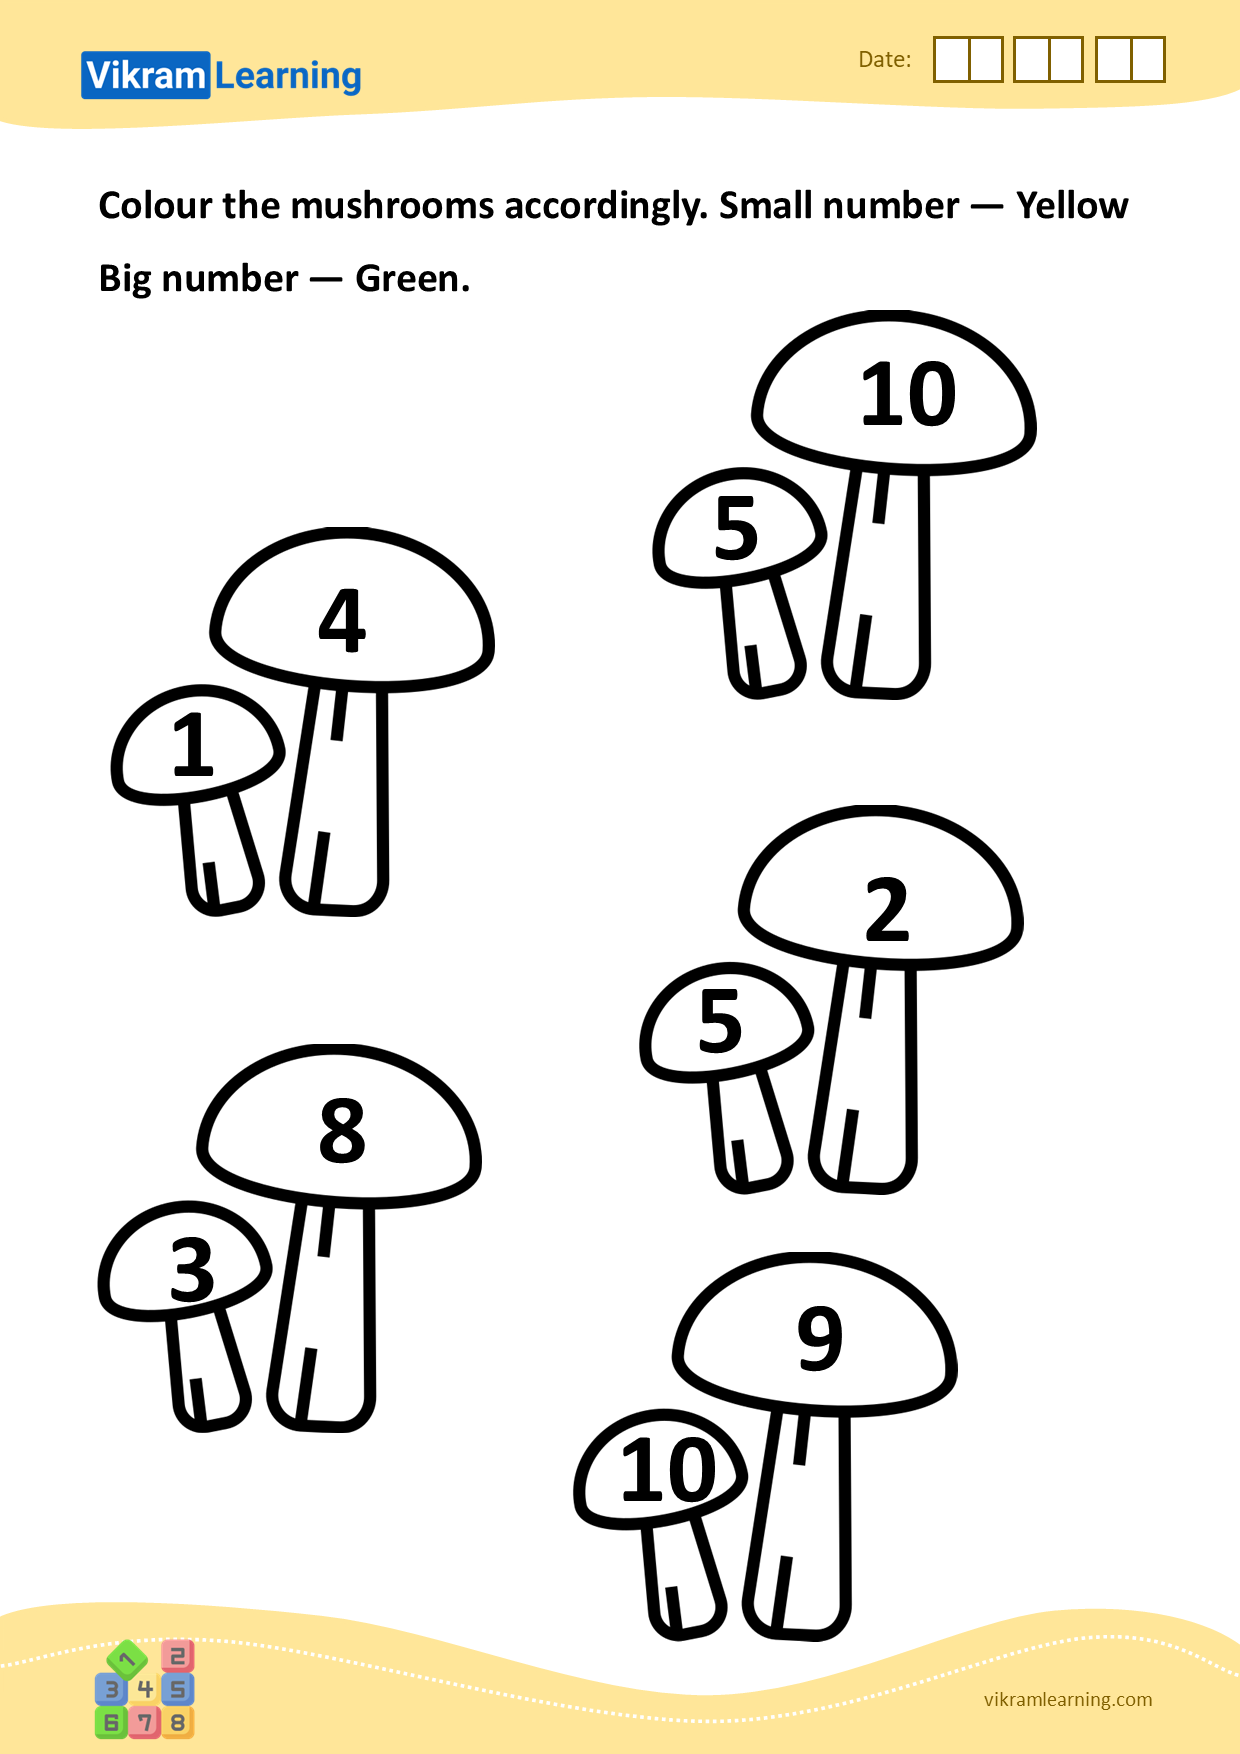 Download colour the mushrooms accordingly. small number — yellow
big number — green. worksheets